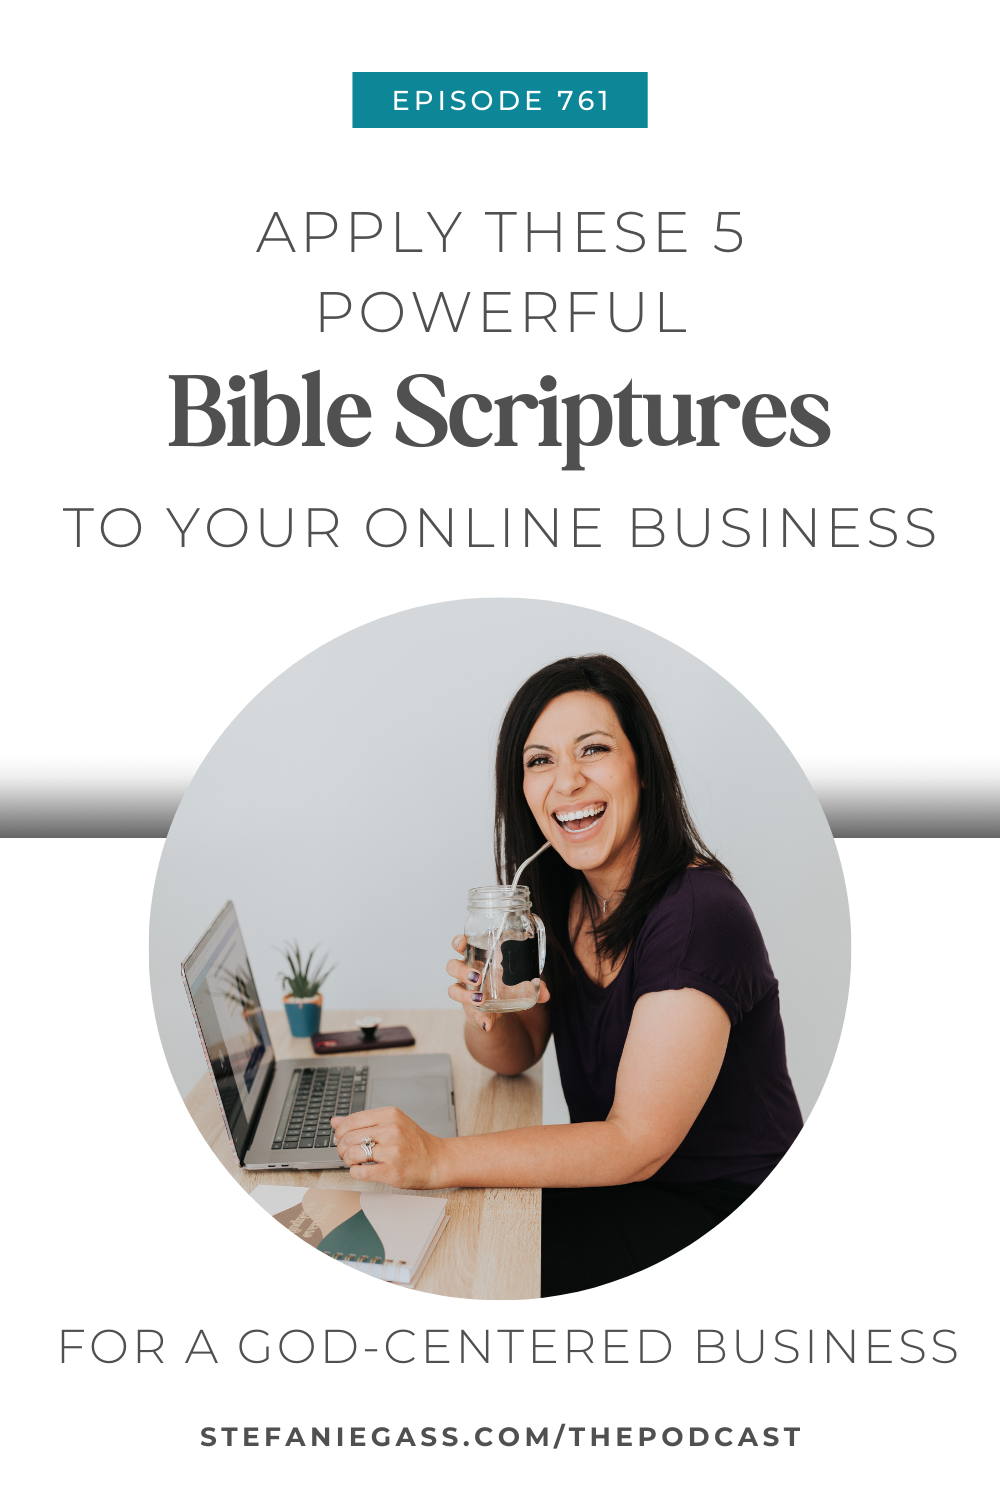 Brown haired woman smiling as she works at her desk with her laptop.  The woman is drinking water.  Text reads: Apply these 5 Bible Scriptures to your online business for a God-centered Business Stefanie Gass Podcast